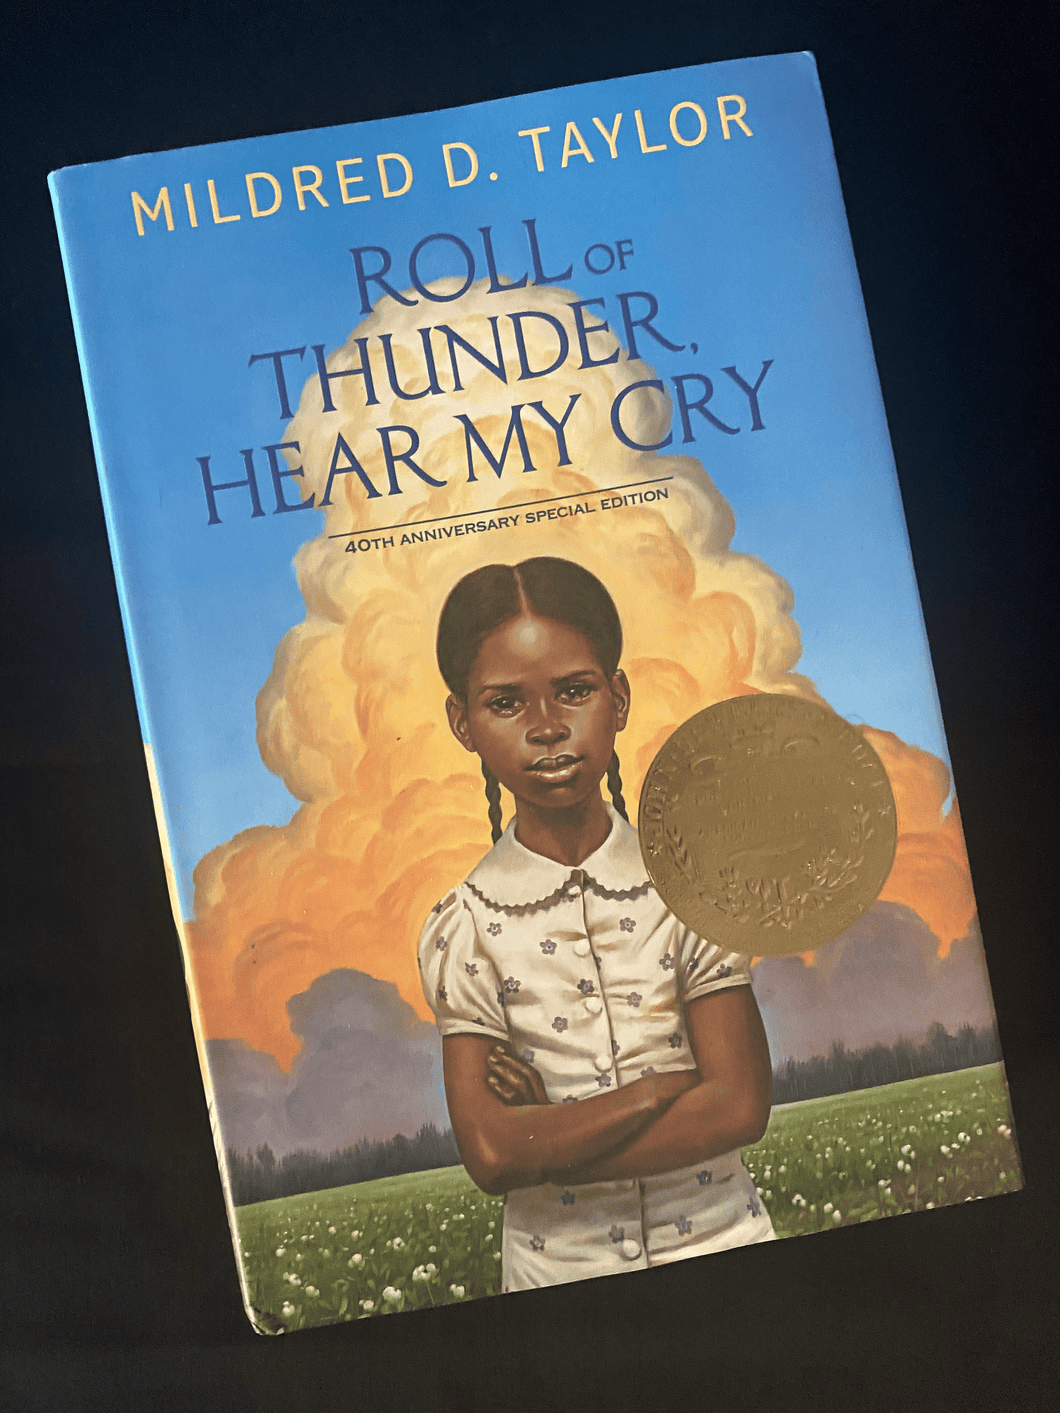 Roll of Thunder, Hear My Cry (40th Anniversary Special Edition By Mildred Taylor